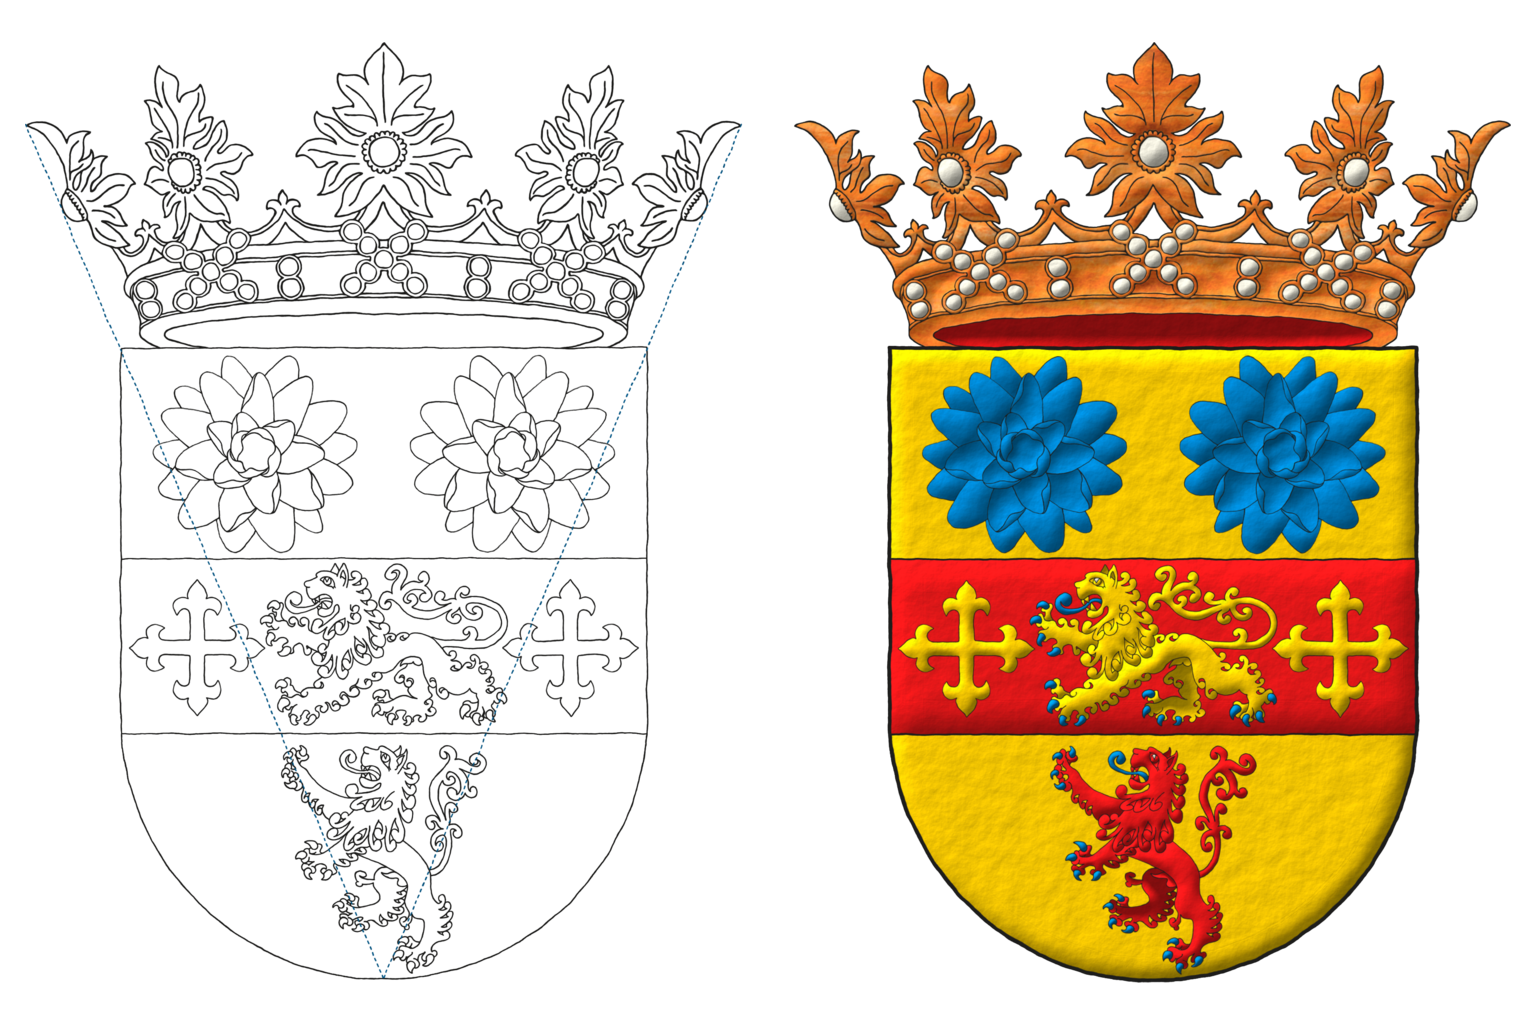 Coat of arms of Karen Cantrell emblazoned by me in 2 steps: delineation and lights and shadows. Blazon: Or, on a fess Gules, between in chief two lotus blossoms Azure, and in base a lion rampant Gules, armed and langued Azure, a lion passant Or, armed and langued Azure, between two crosses flory Or. Crest: A crown Sandal of Fetor of Kupang.